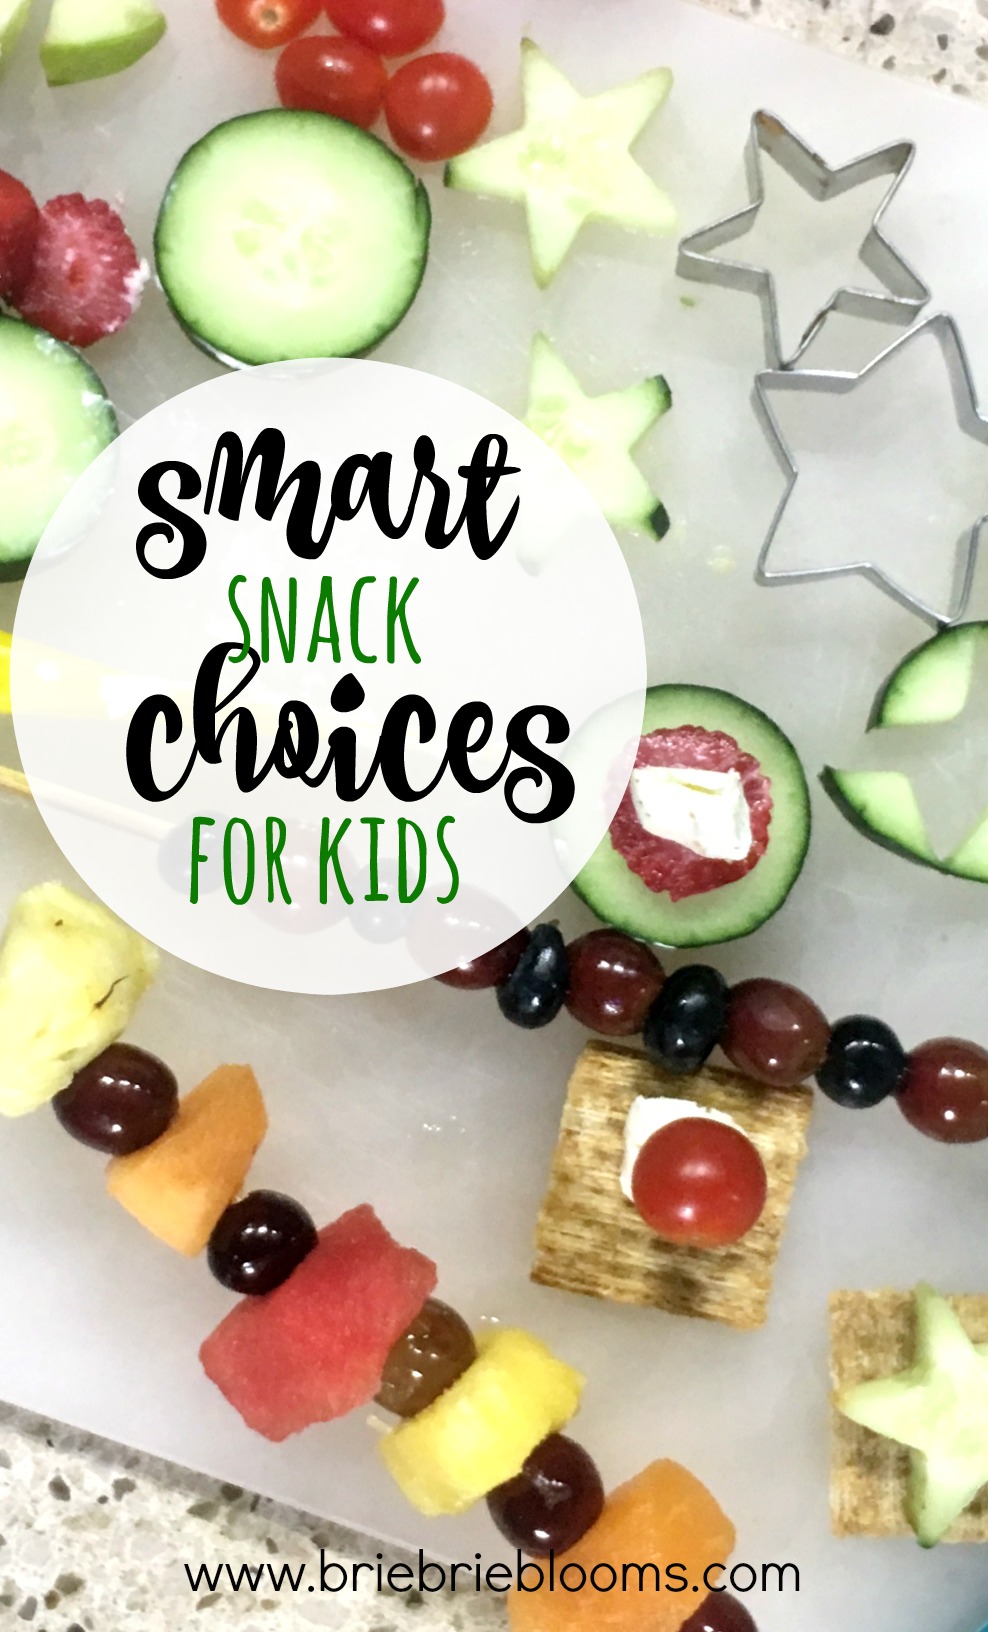 Learn about making smart snack choices for kids and how you can help make a difference with Breakfast in the Classroom by Valley of the Sun United Way and their partner Edward Jones.